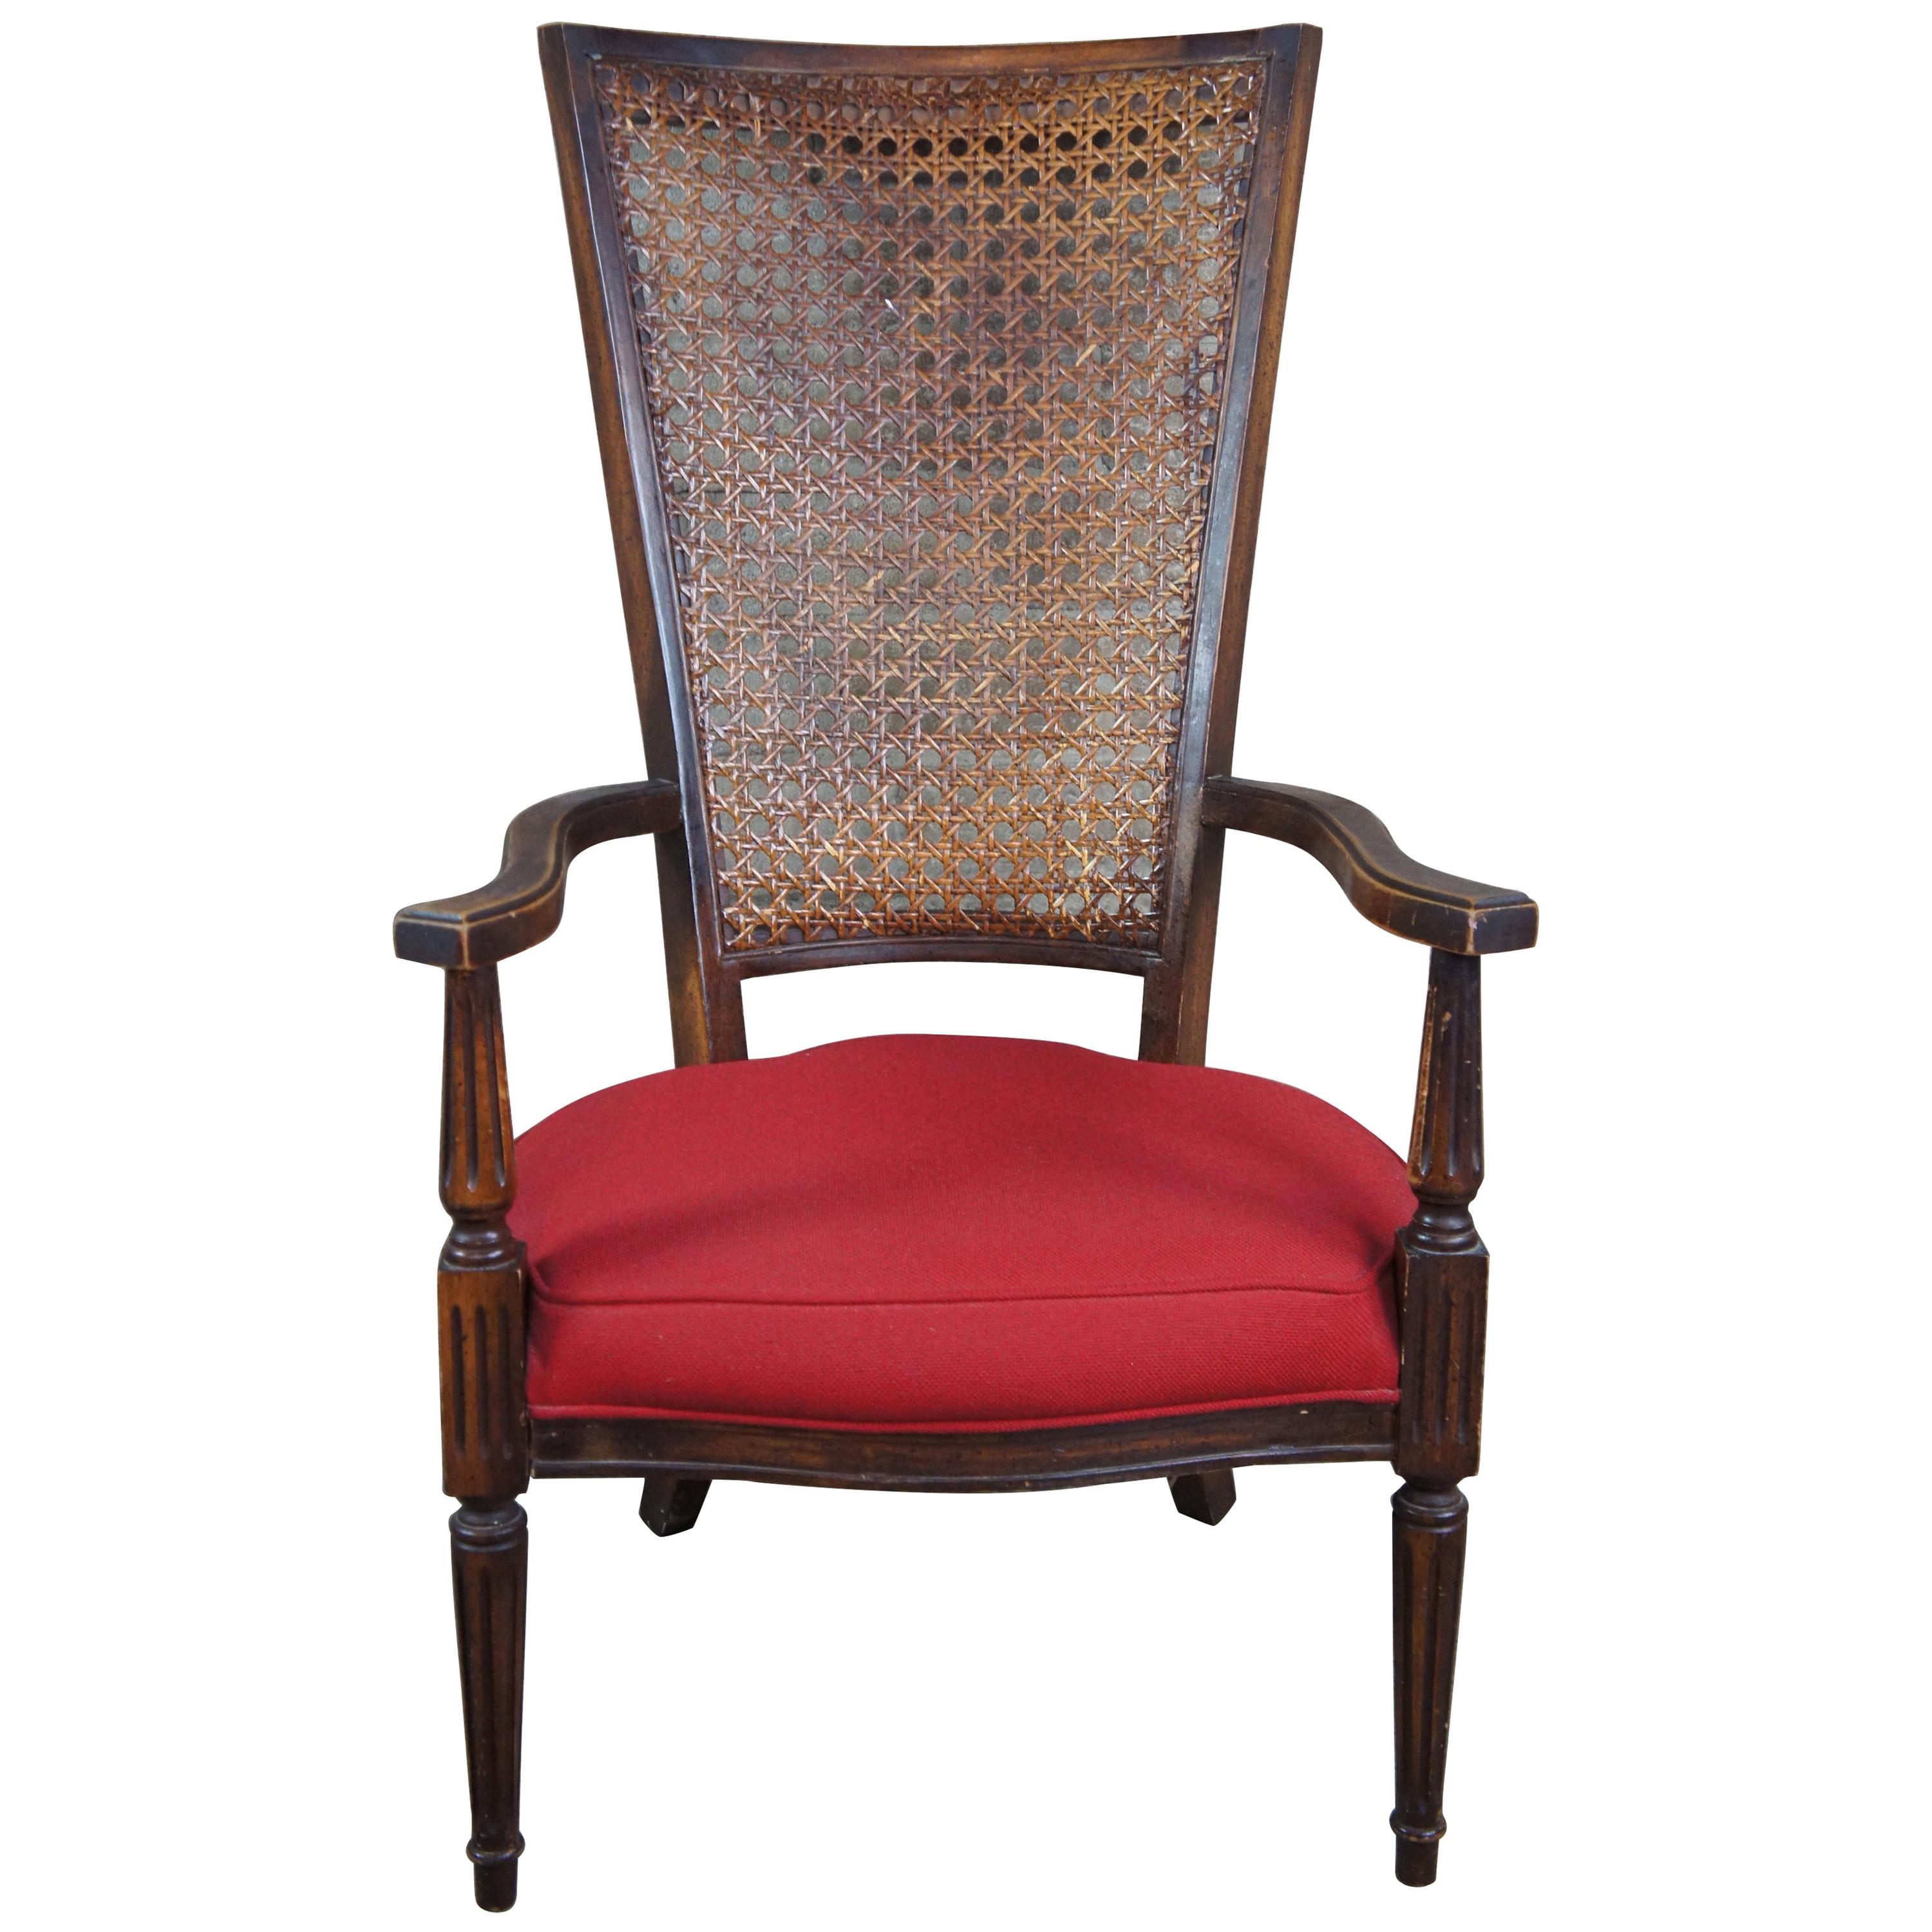 20th Century French Armchair Distressed Walnut Caned Back Red Seat For Sale